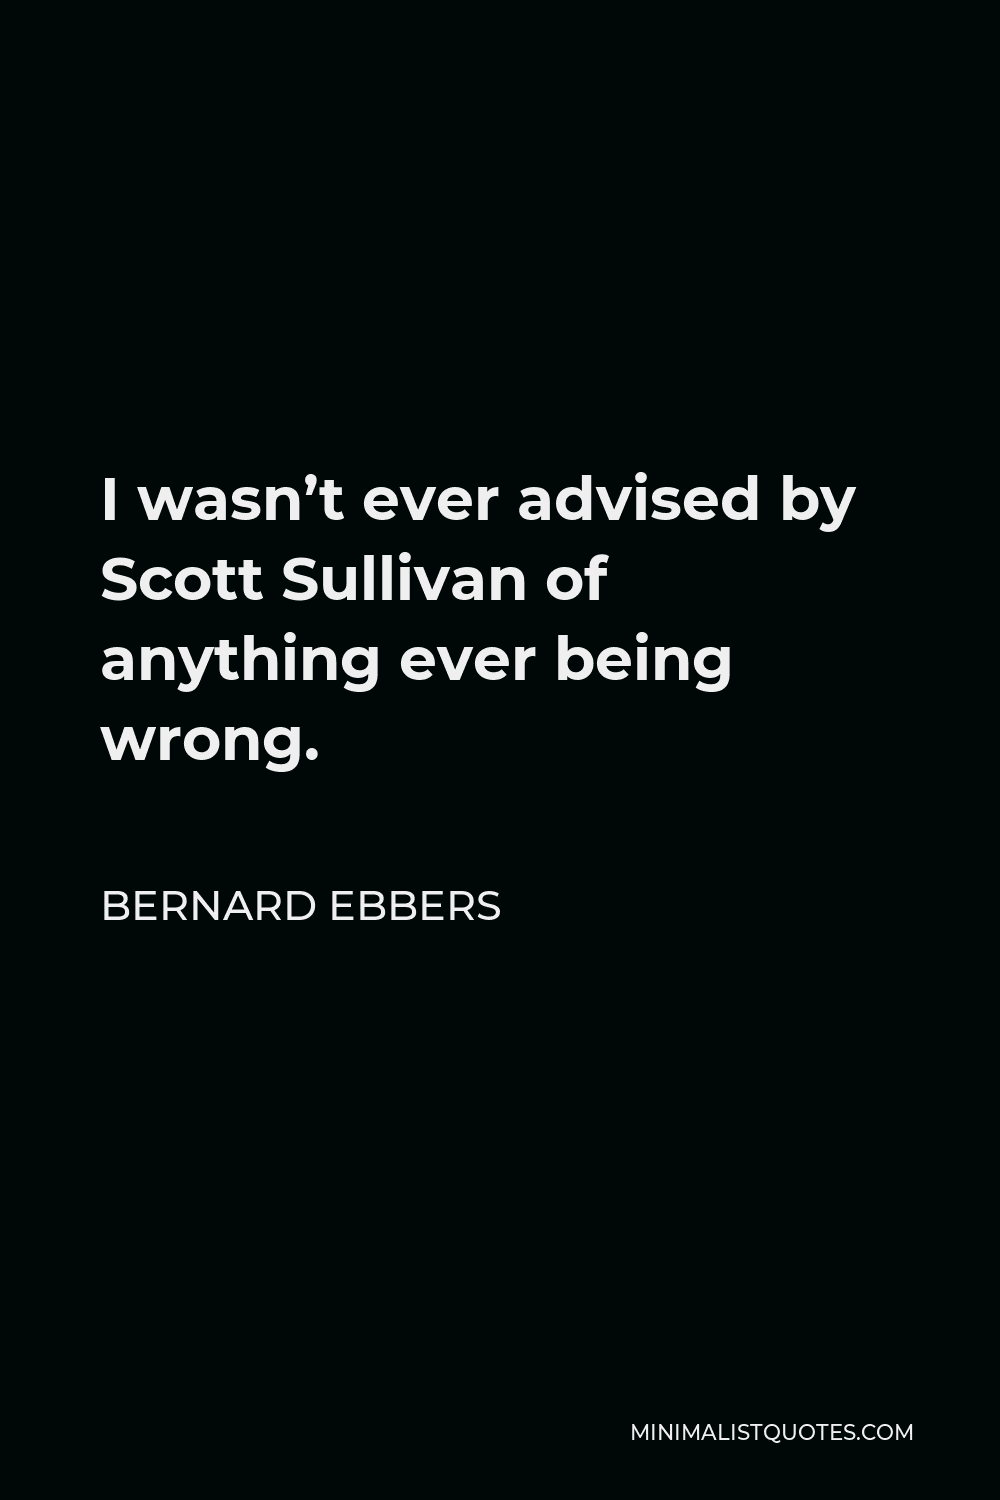 Bernard Ebbers Quote - I wasn’t ever advised by Scott Sullivan of anything ever being wrong.